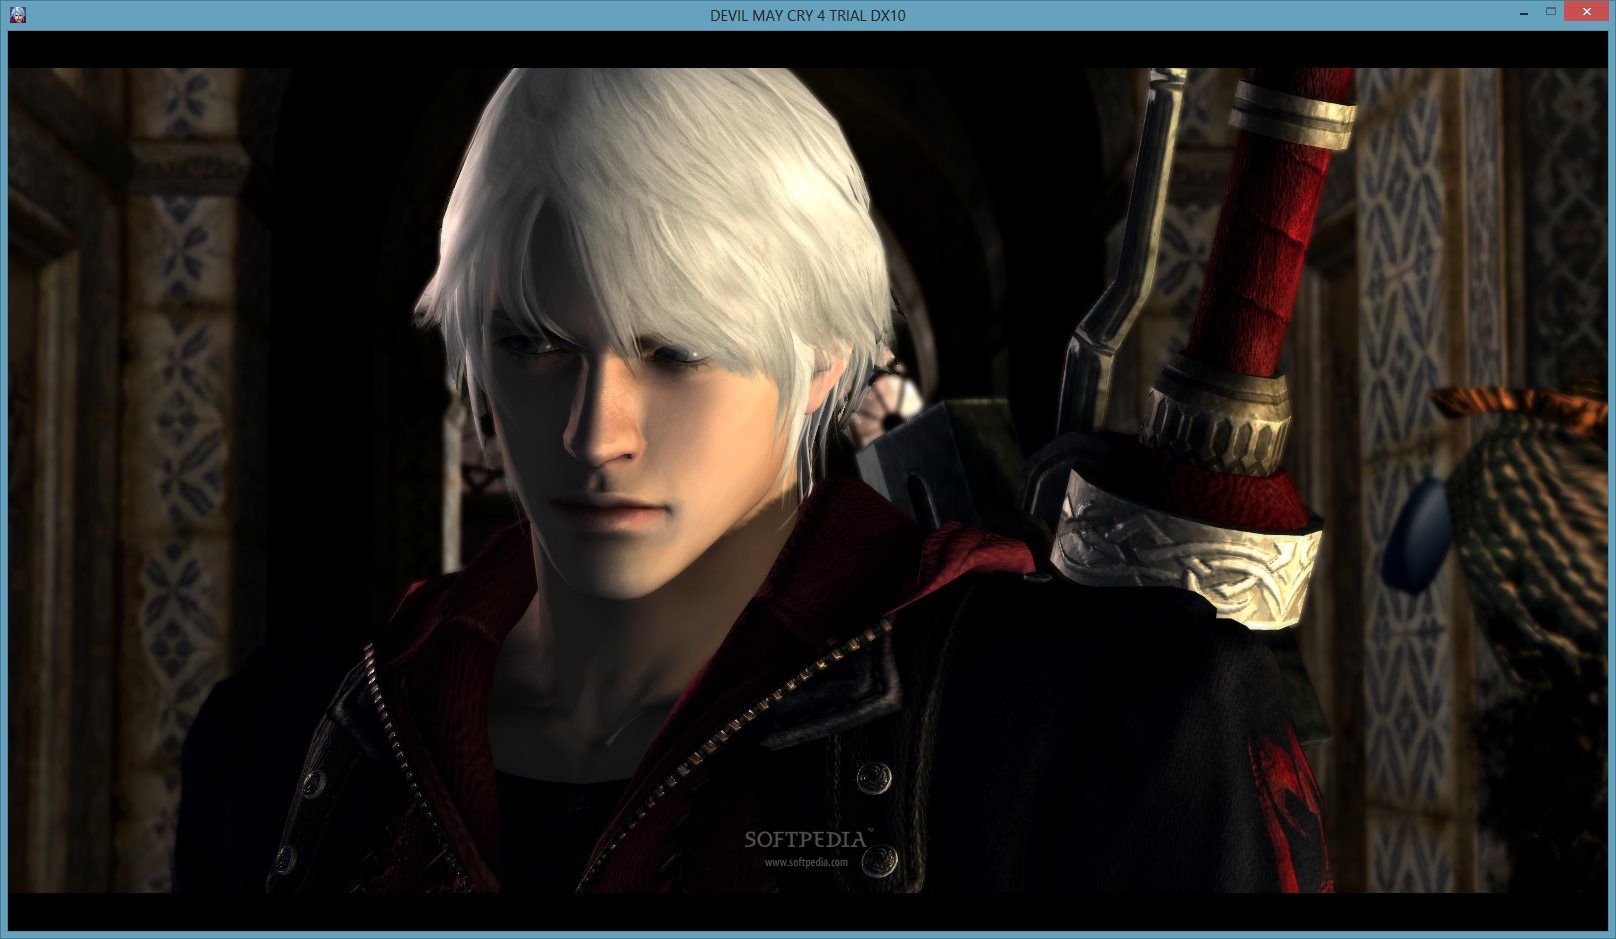 dude1286 Plays Devil May Cry 4 X360 - Day 7